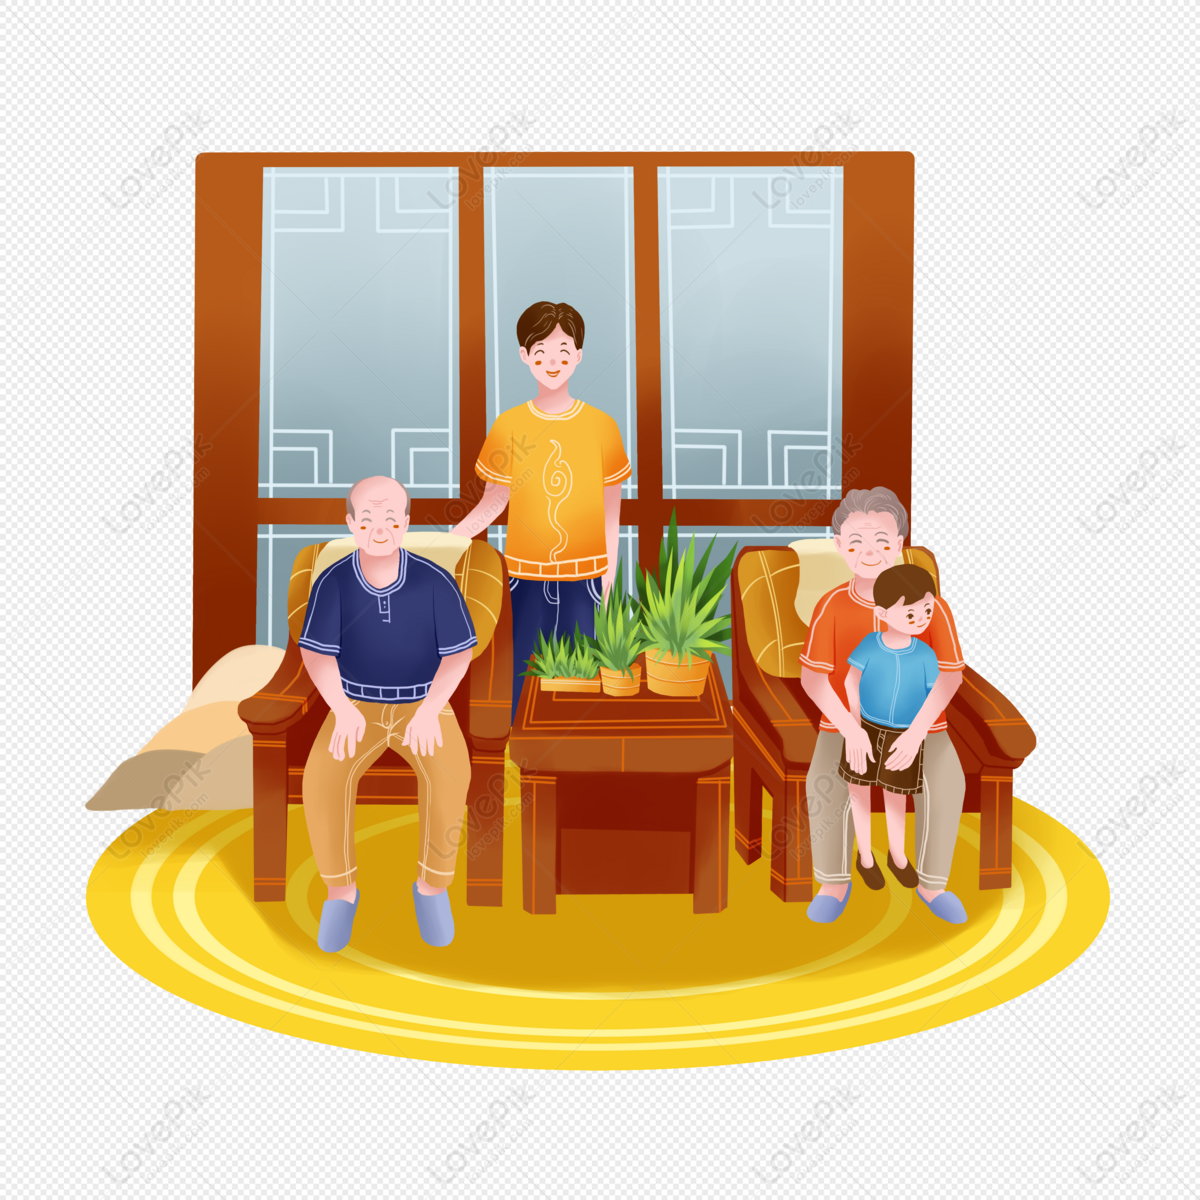 Family Reunion PNG Transparent Image And Clipart Image For Free Download -  Lovepik | 401627687